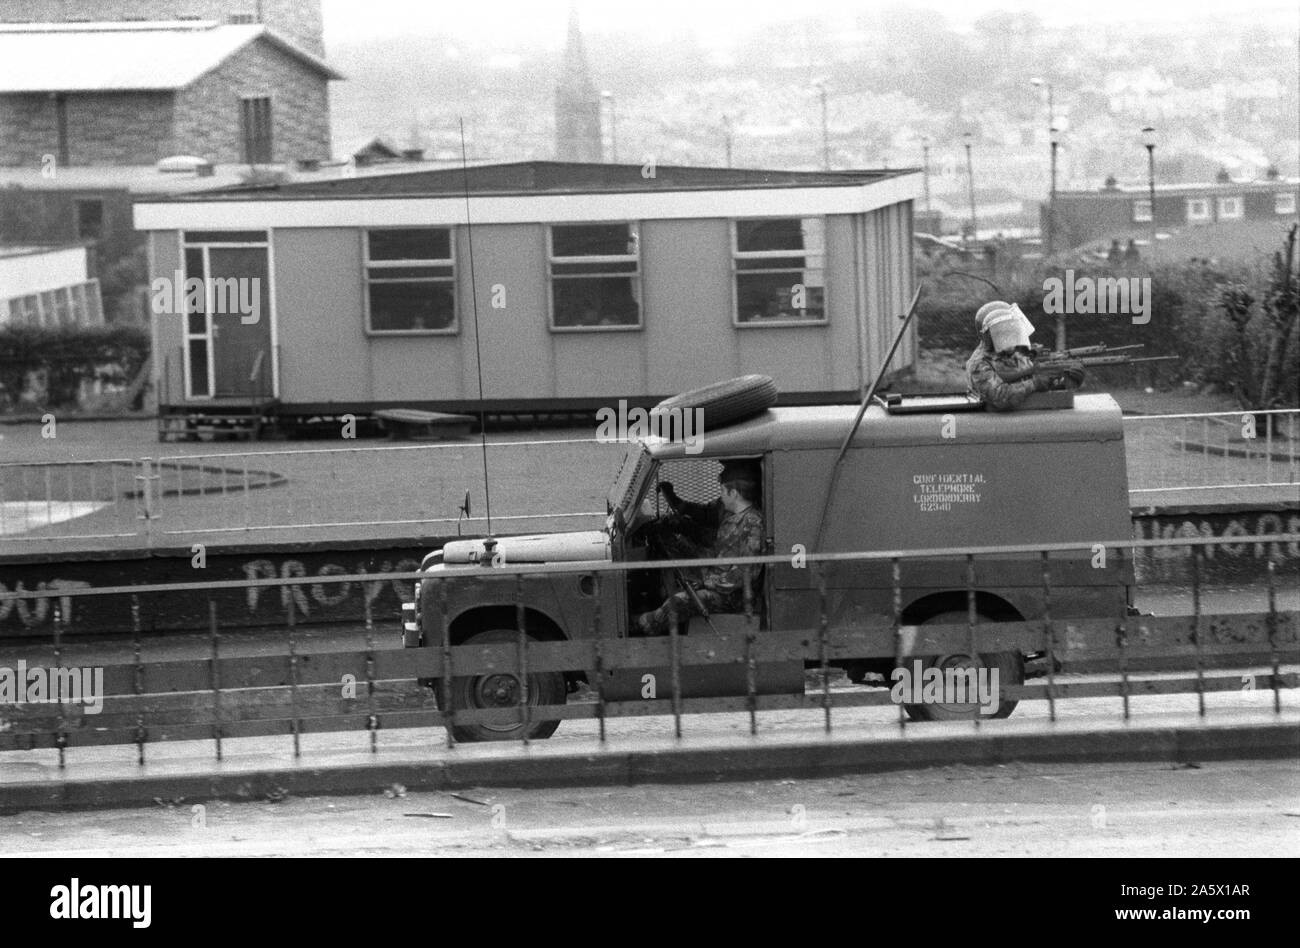 The Troubles 1980s Derry Northern Ireland Londonderry 1983 British soldiers on patrol in armoured vehicle 80s HOMER SYKES Stock Photo